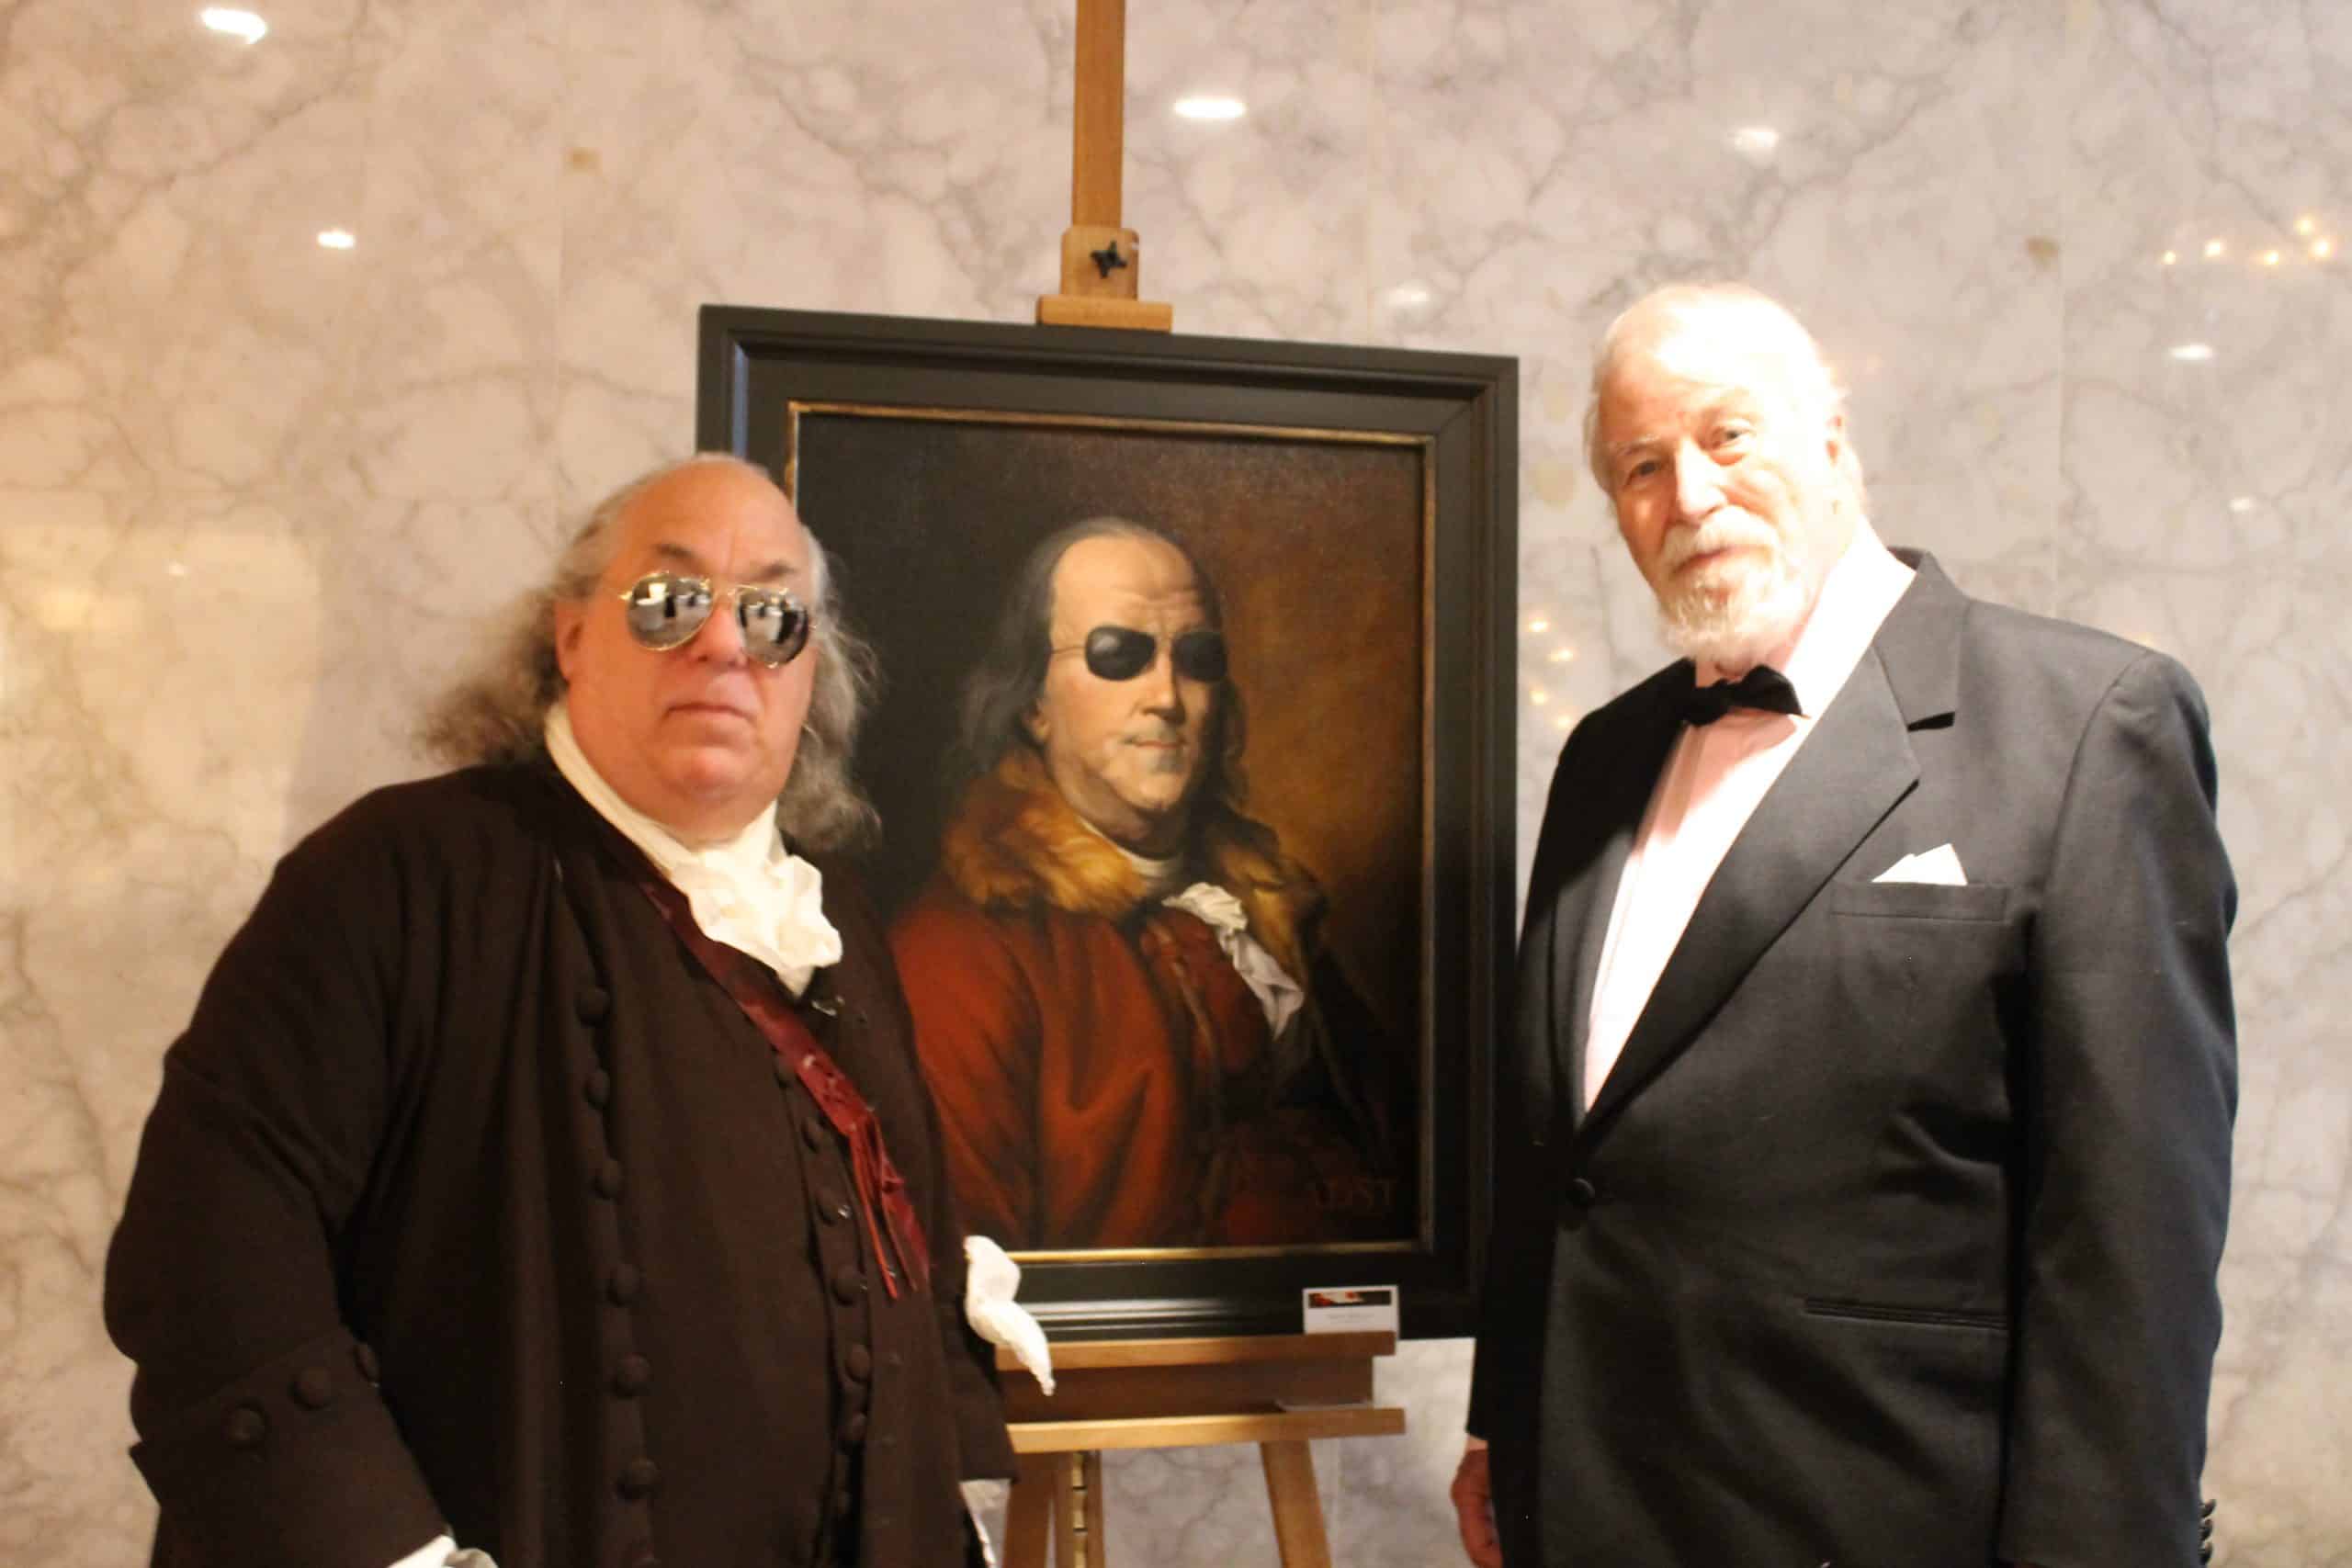 Benjamin Franklin and Stu Kennedy at the ADST Gala event and unveiling of Cool Ben.